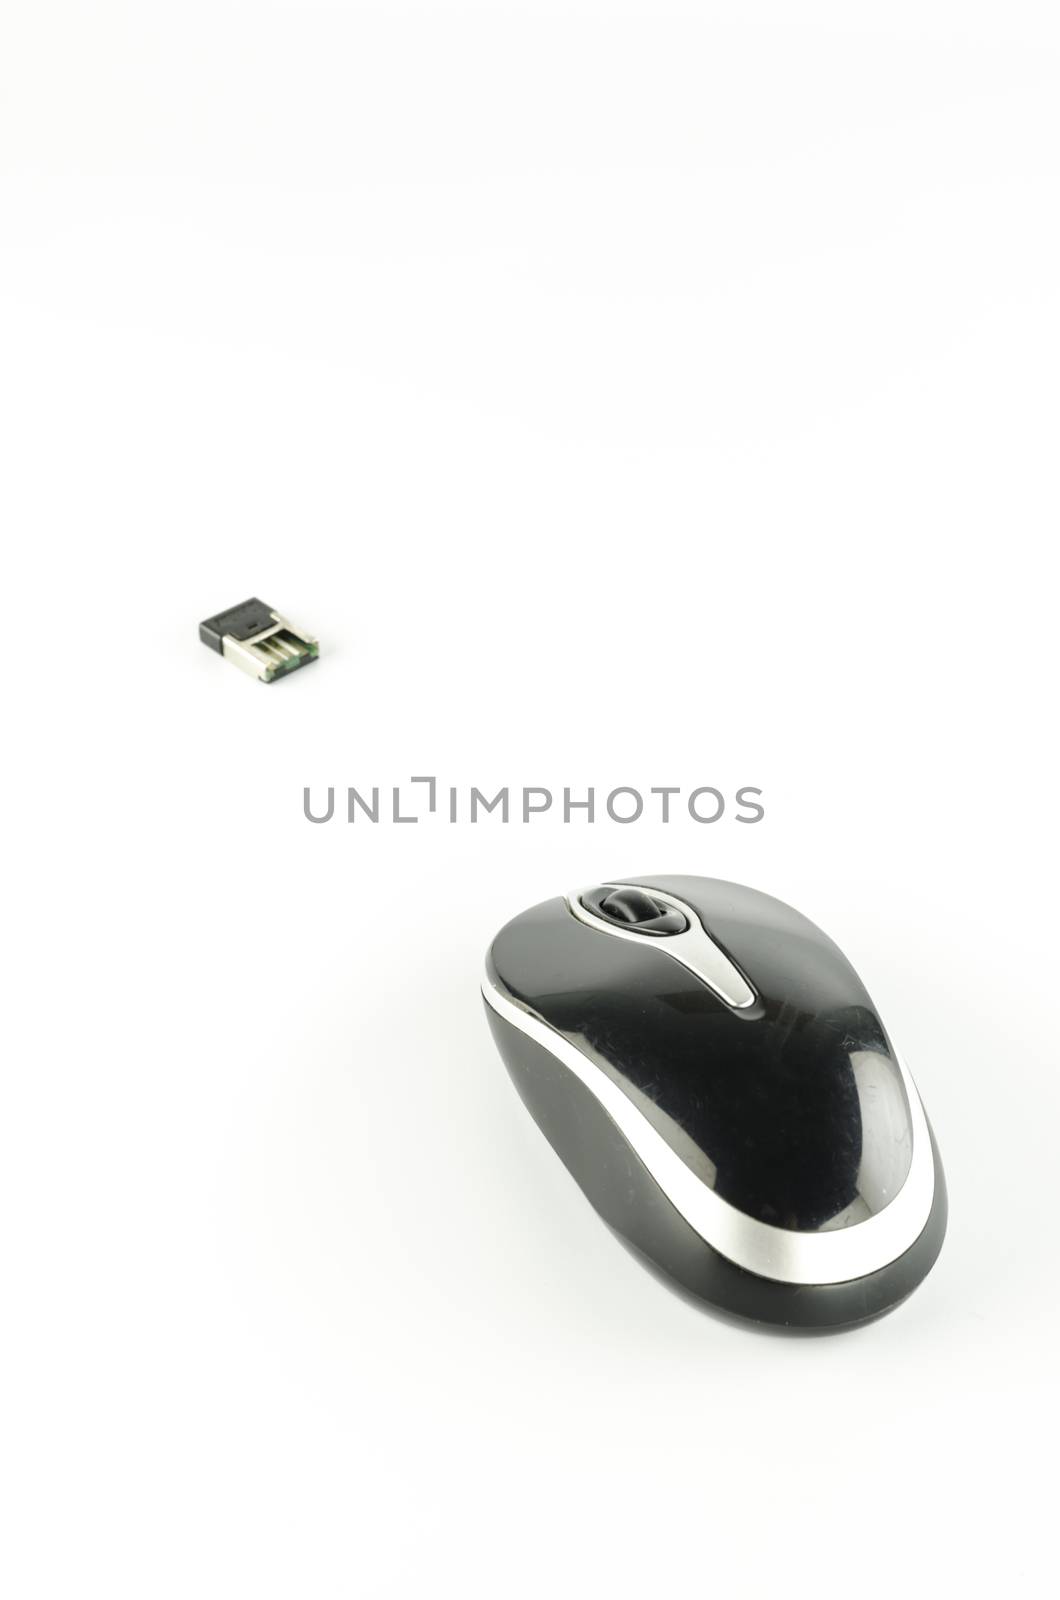 computer wireless mouse on a white background